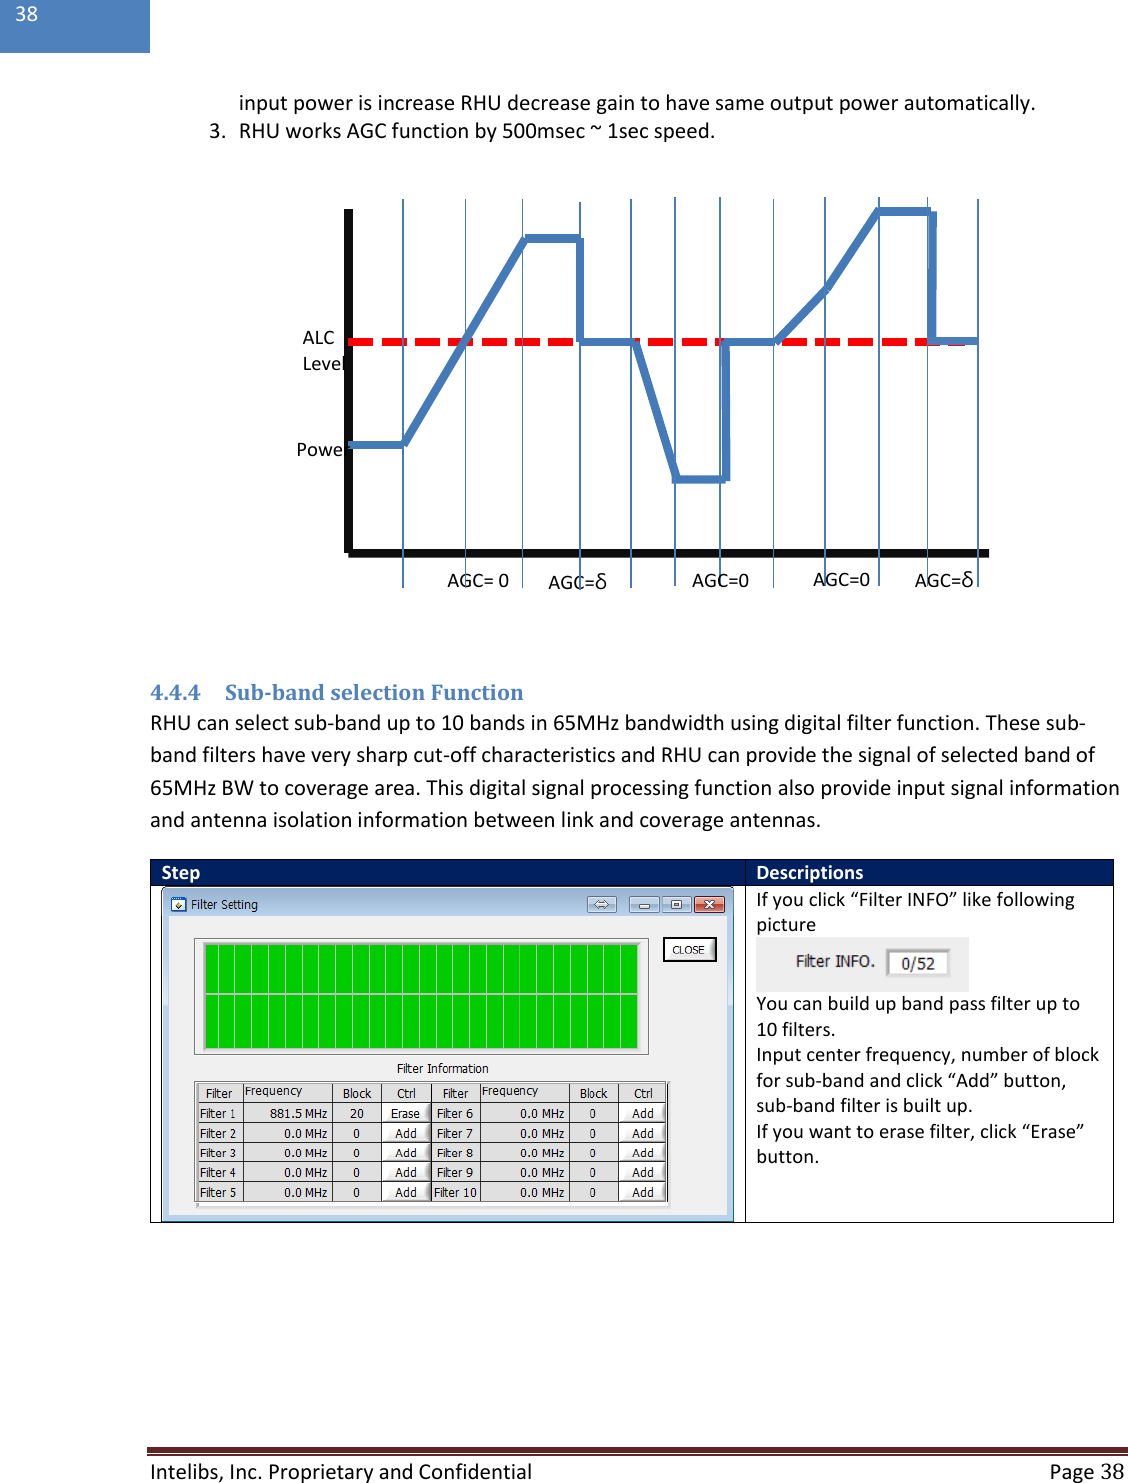  Intelibs, Inc. Proprietary and Confidential   Page 38  38  input power is increase RHU decrease gain to have same output power automatically. 3. RHU works AGC function by 500msec ~ 1sec speed.    4.4.4 Sub-band selection Function RHU can select sub-band up to 10 bands in 65MHz bandwidth using digital filter function. These sub-band filters have very sharp cut-off characteristics and RHU can provide the signal of selected band of 65MHz BW to coverage area. This digital signal processing function also provide input signal information and antenna isolation information between link and coverage antennas. Step Descriptions  If you click “Filter INFO” like following picture  You can build up band pass filter up to 10 filters.  Input center frequency, number of block for sub-band and click “Add” button, sub-band filter is built up. If you want to erase filter, click “Erase” button.     ALC Level Power AGC= 0 AGC=δ AGC=δ AGC=0 AGC=0 